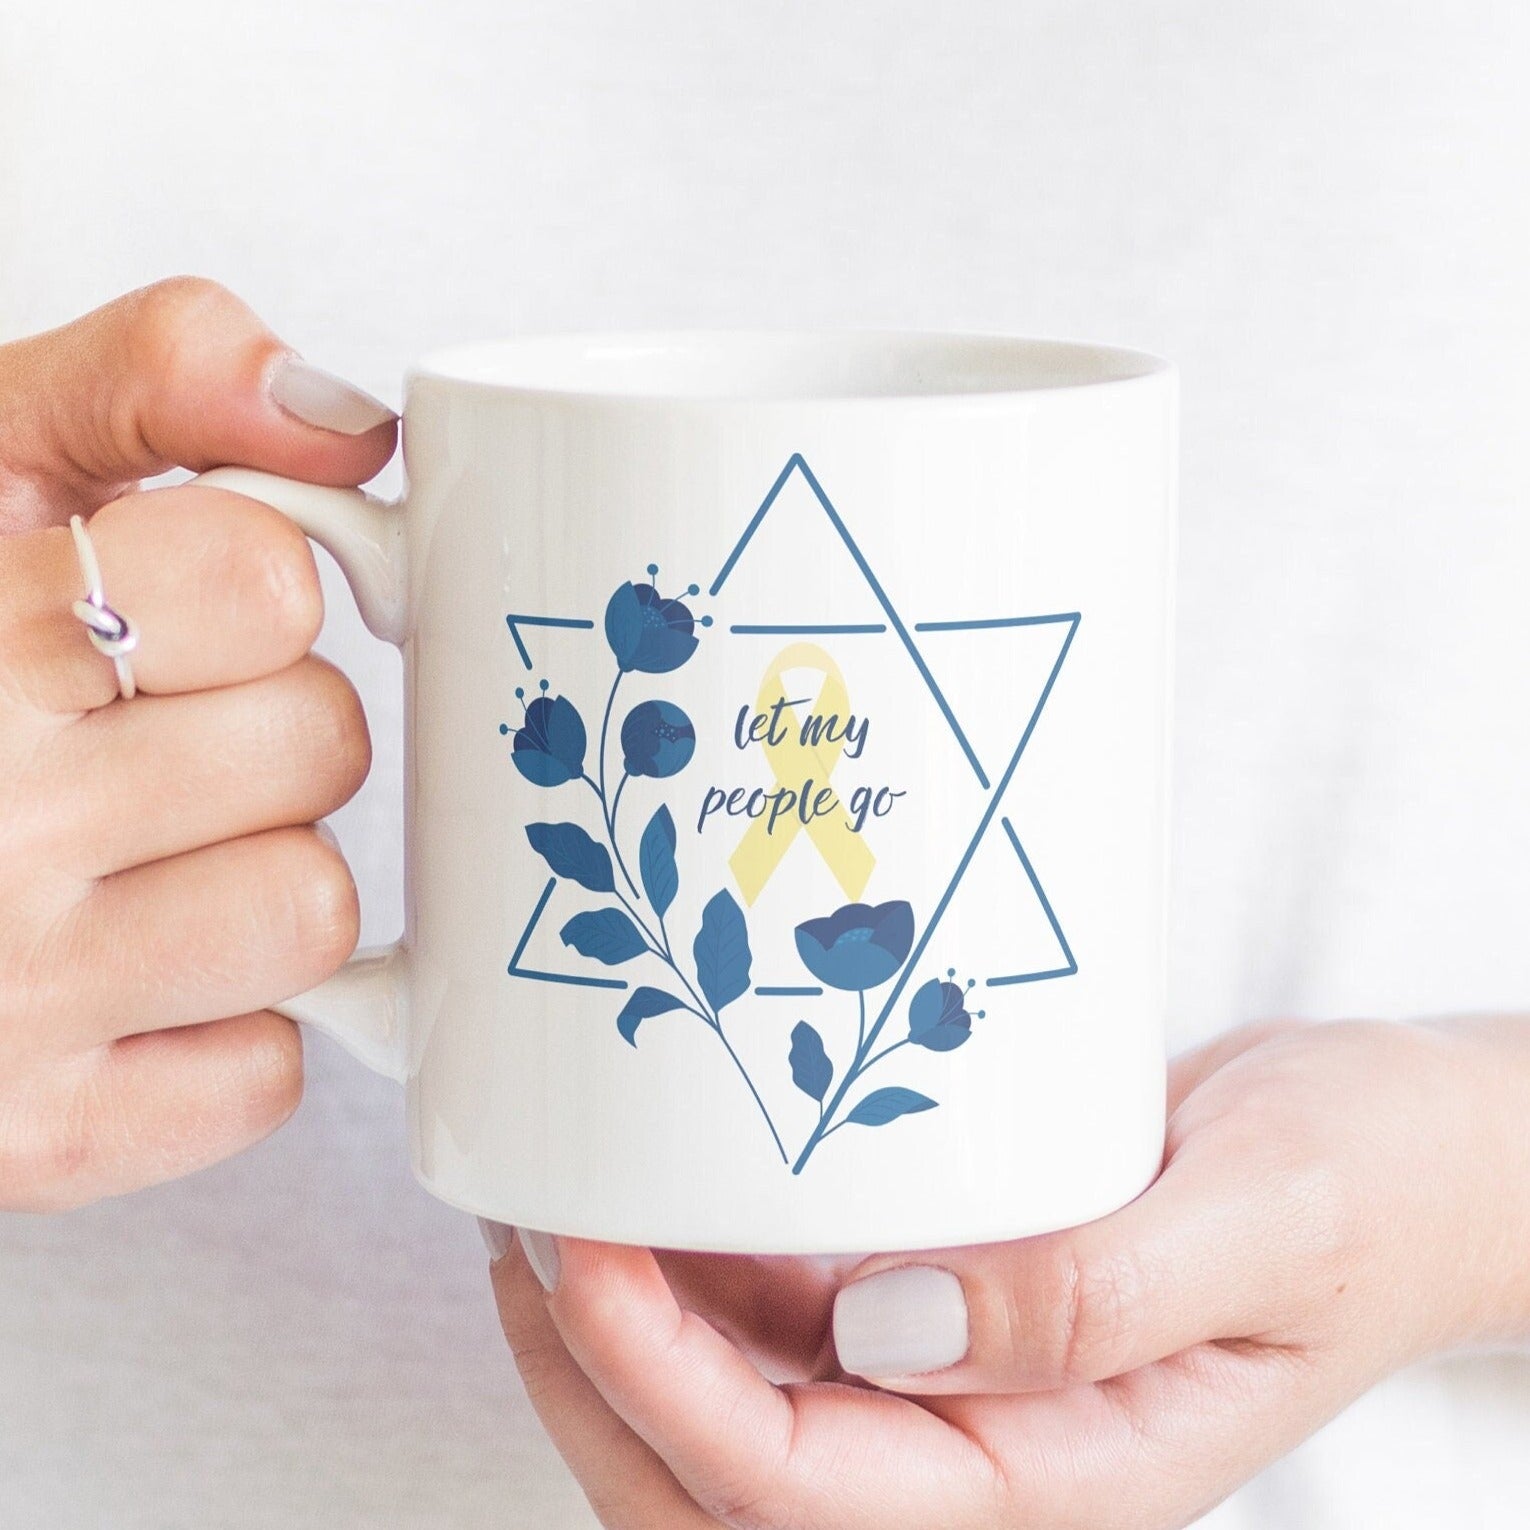 Free the Hostages Jewish Pride Home Decor Salt and Sparkle